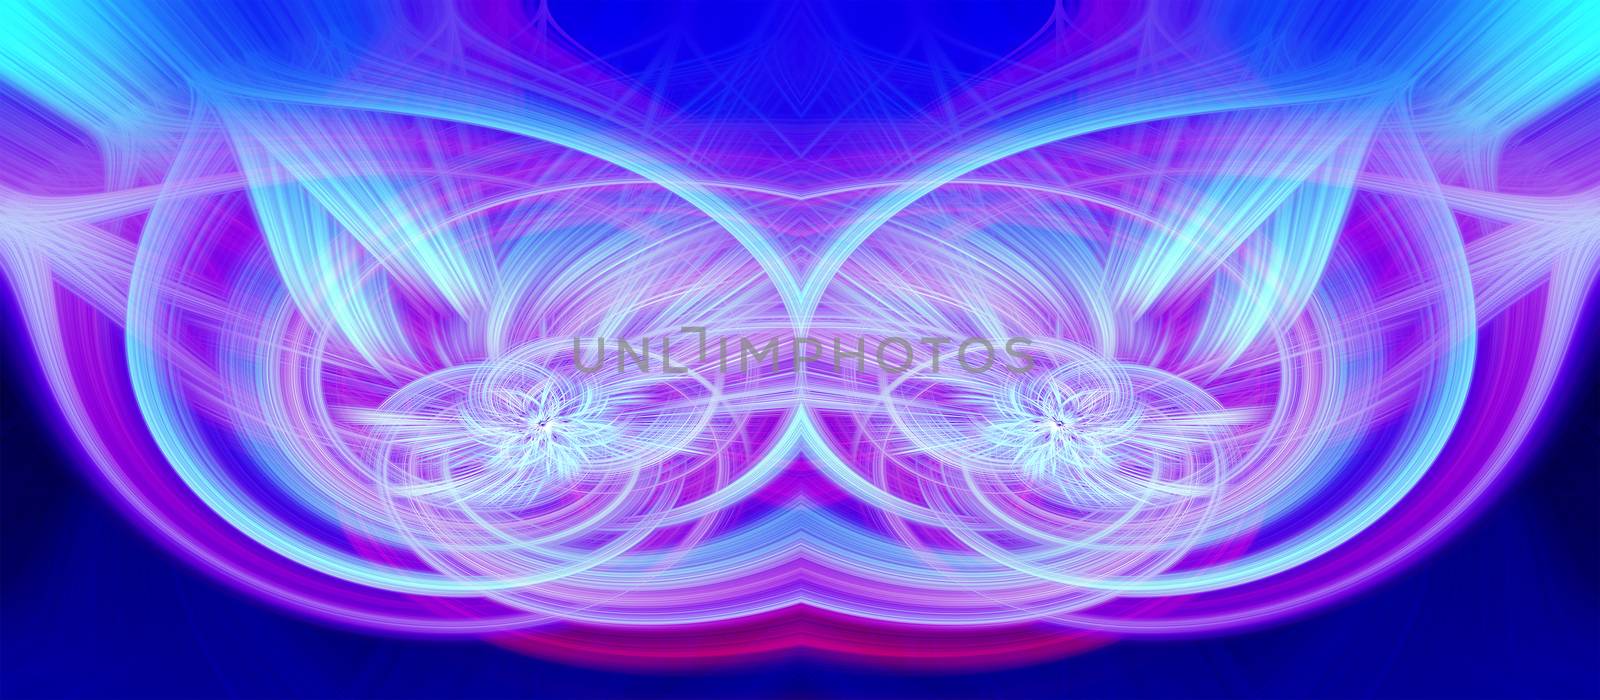 Beautiful abstract intertwined glowing 3d fibers forming a shape of sparkle, flame, flower, interlinked hearts. Blue, maroon, cyan, and purple colors. Banner size. Illustration.